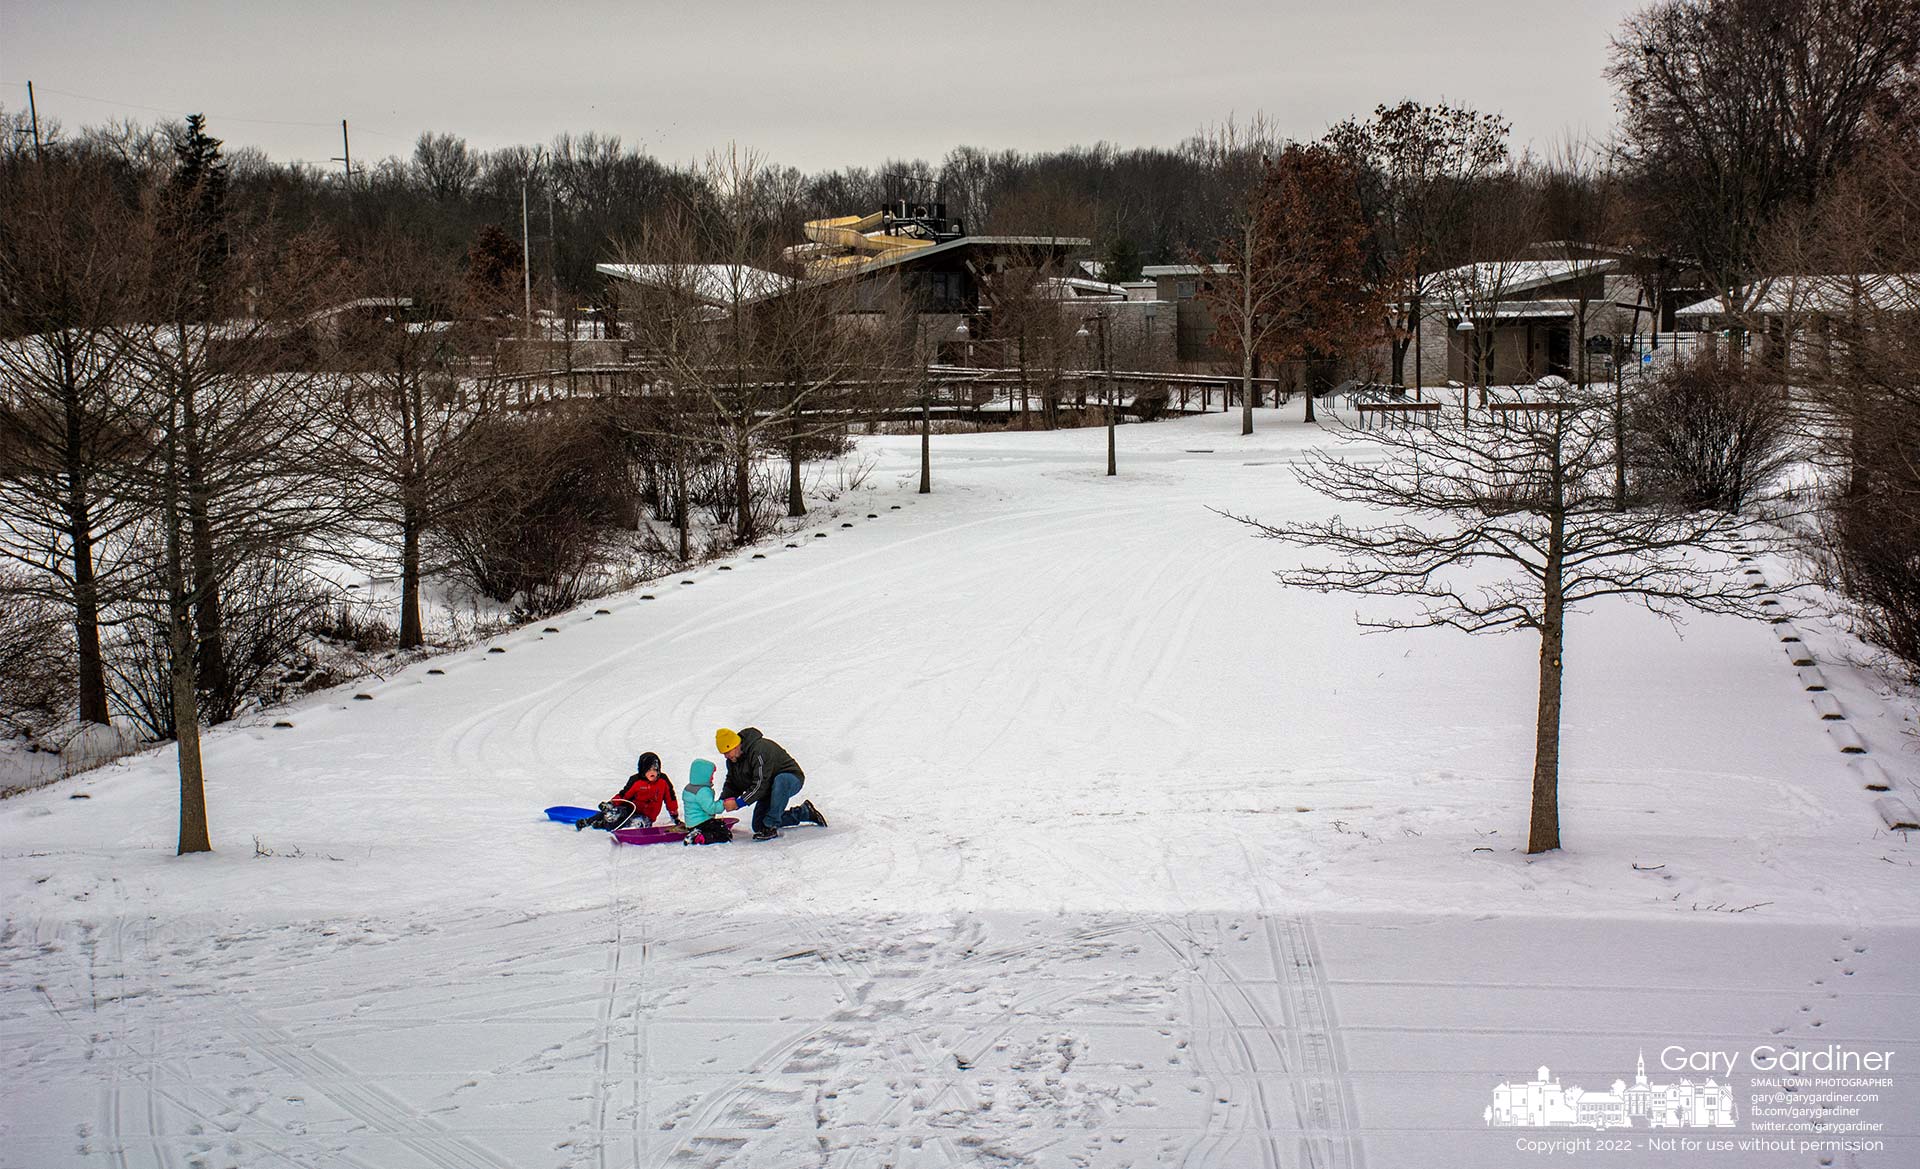 A father returns his daughter's gloves to her hands after they came off during a speedy trip down the ice-covered small sledding hill at Highlands Park. My Final Photo for Jan. 28, 2022.